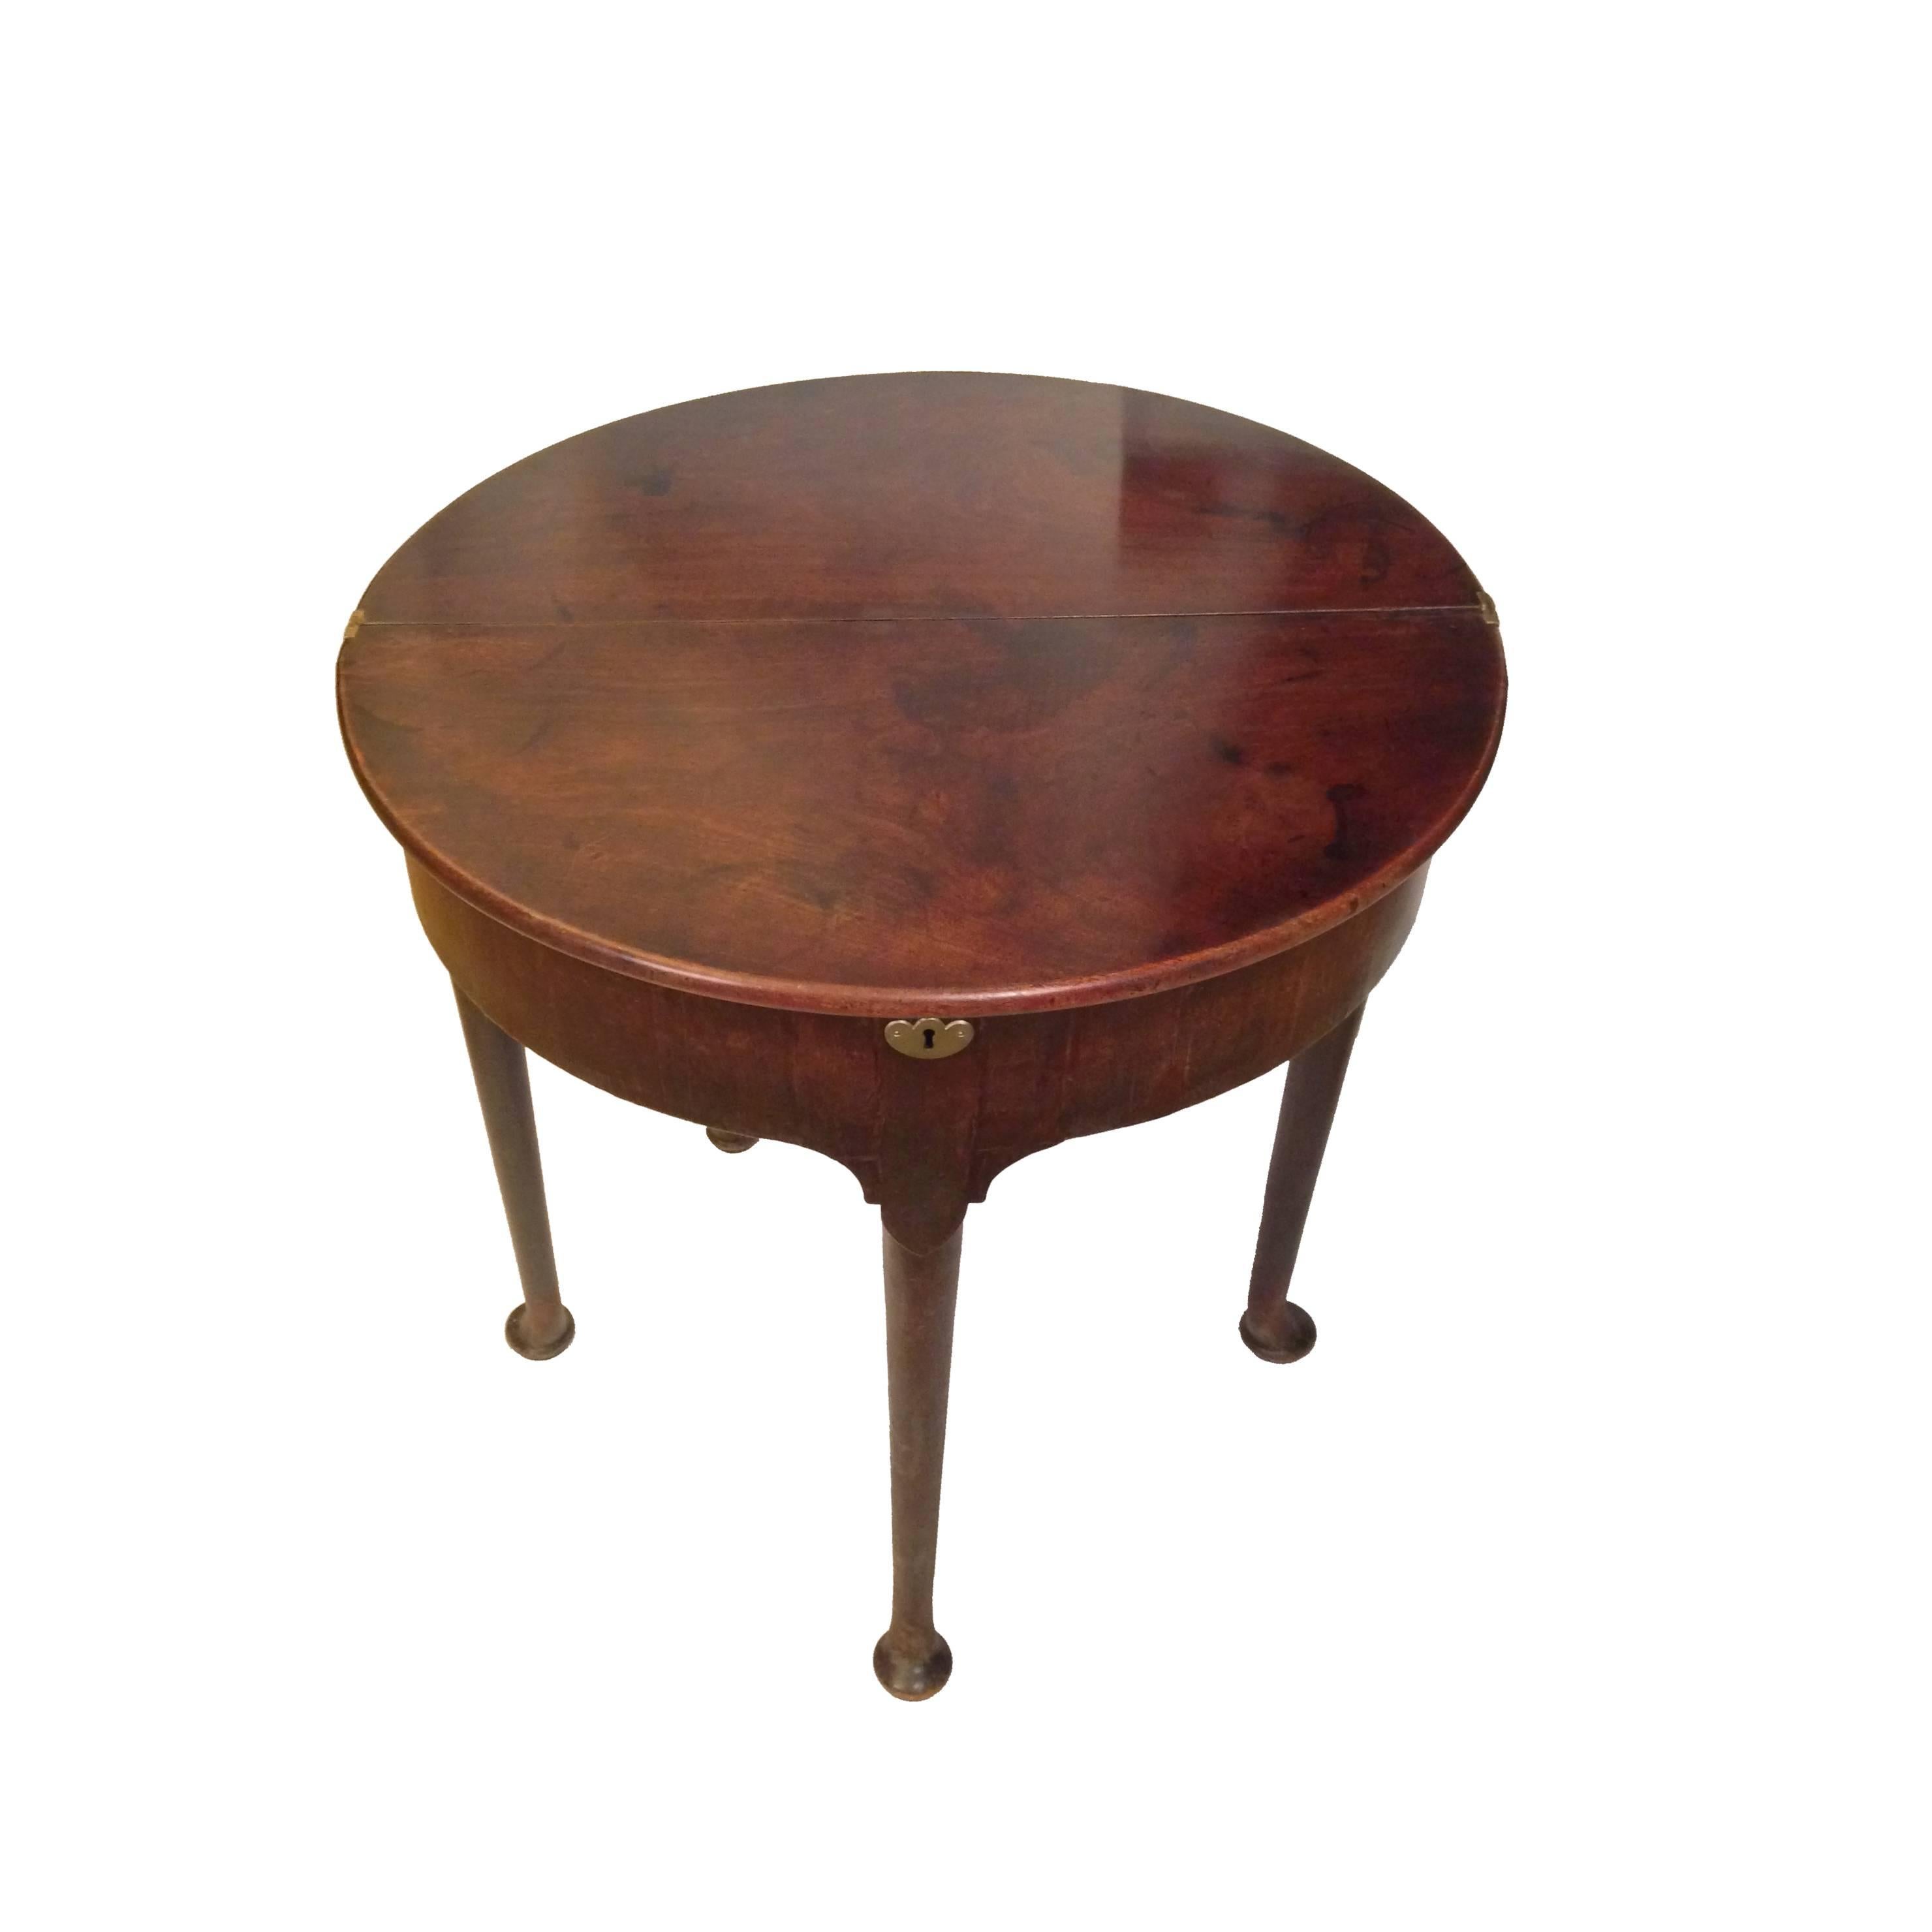 An 18th century mahogany demilune tea table with fold over top enclosing a storage well. The double hinged tabletop lifts and folds back, supported by a single gate leg, which creates a circular surface area. Turned, tapered legs with pad